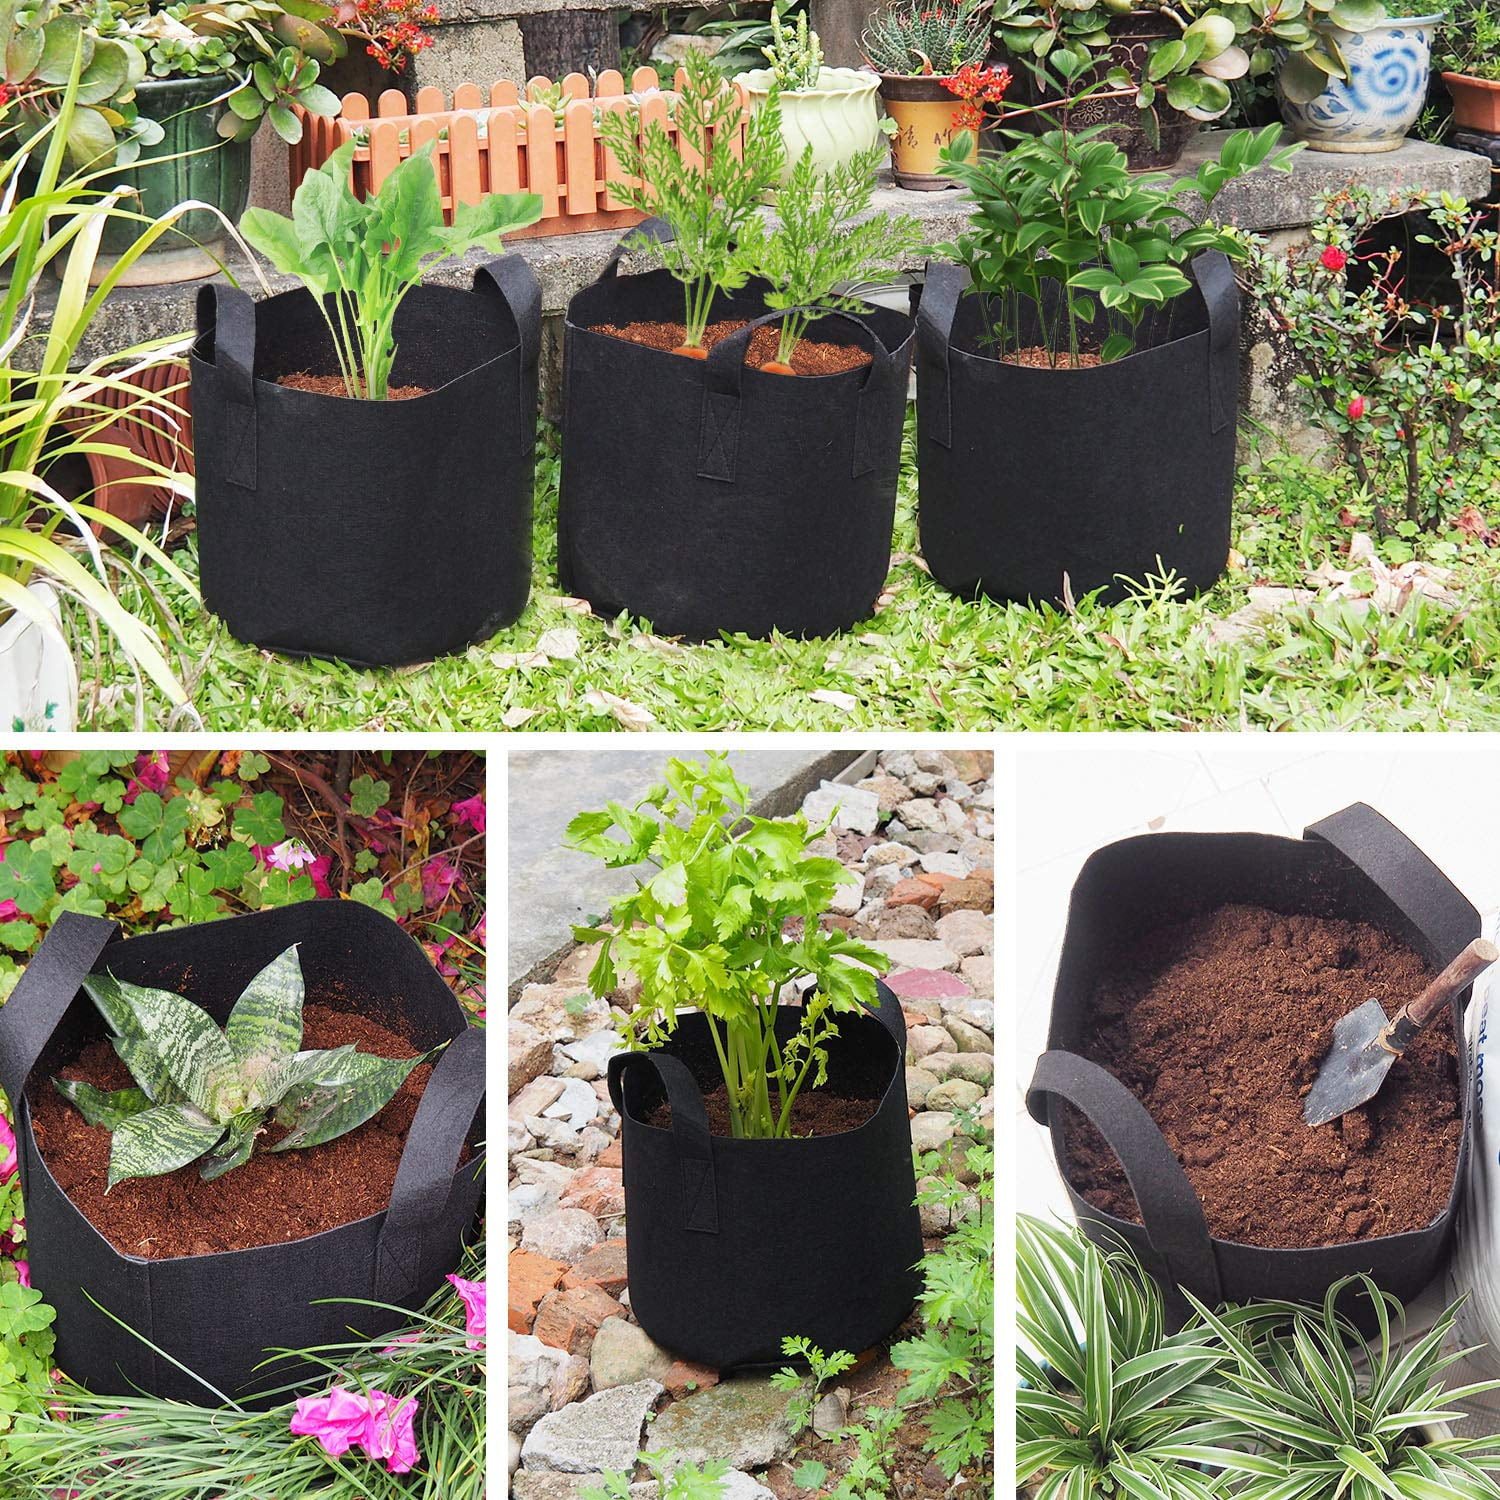 Dark Grey Vegetable/Flower/Plant Container Heavy-Duty Thickened NONWOVEN Aeration Fabric Plant POTS Indoor & Outdoor Durable Handles Grow Bags 5 Pack 1 Gallon 